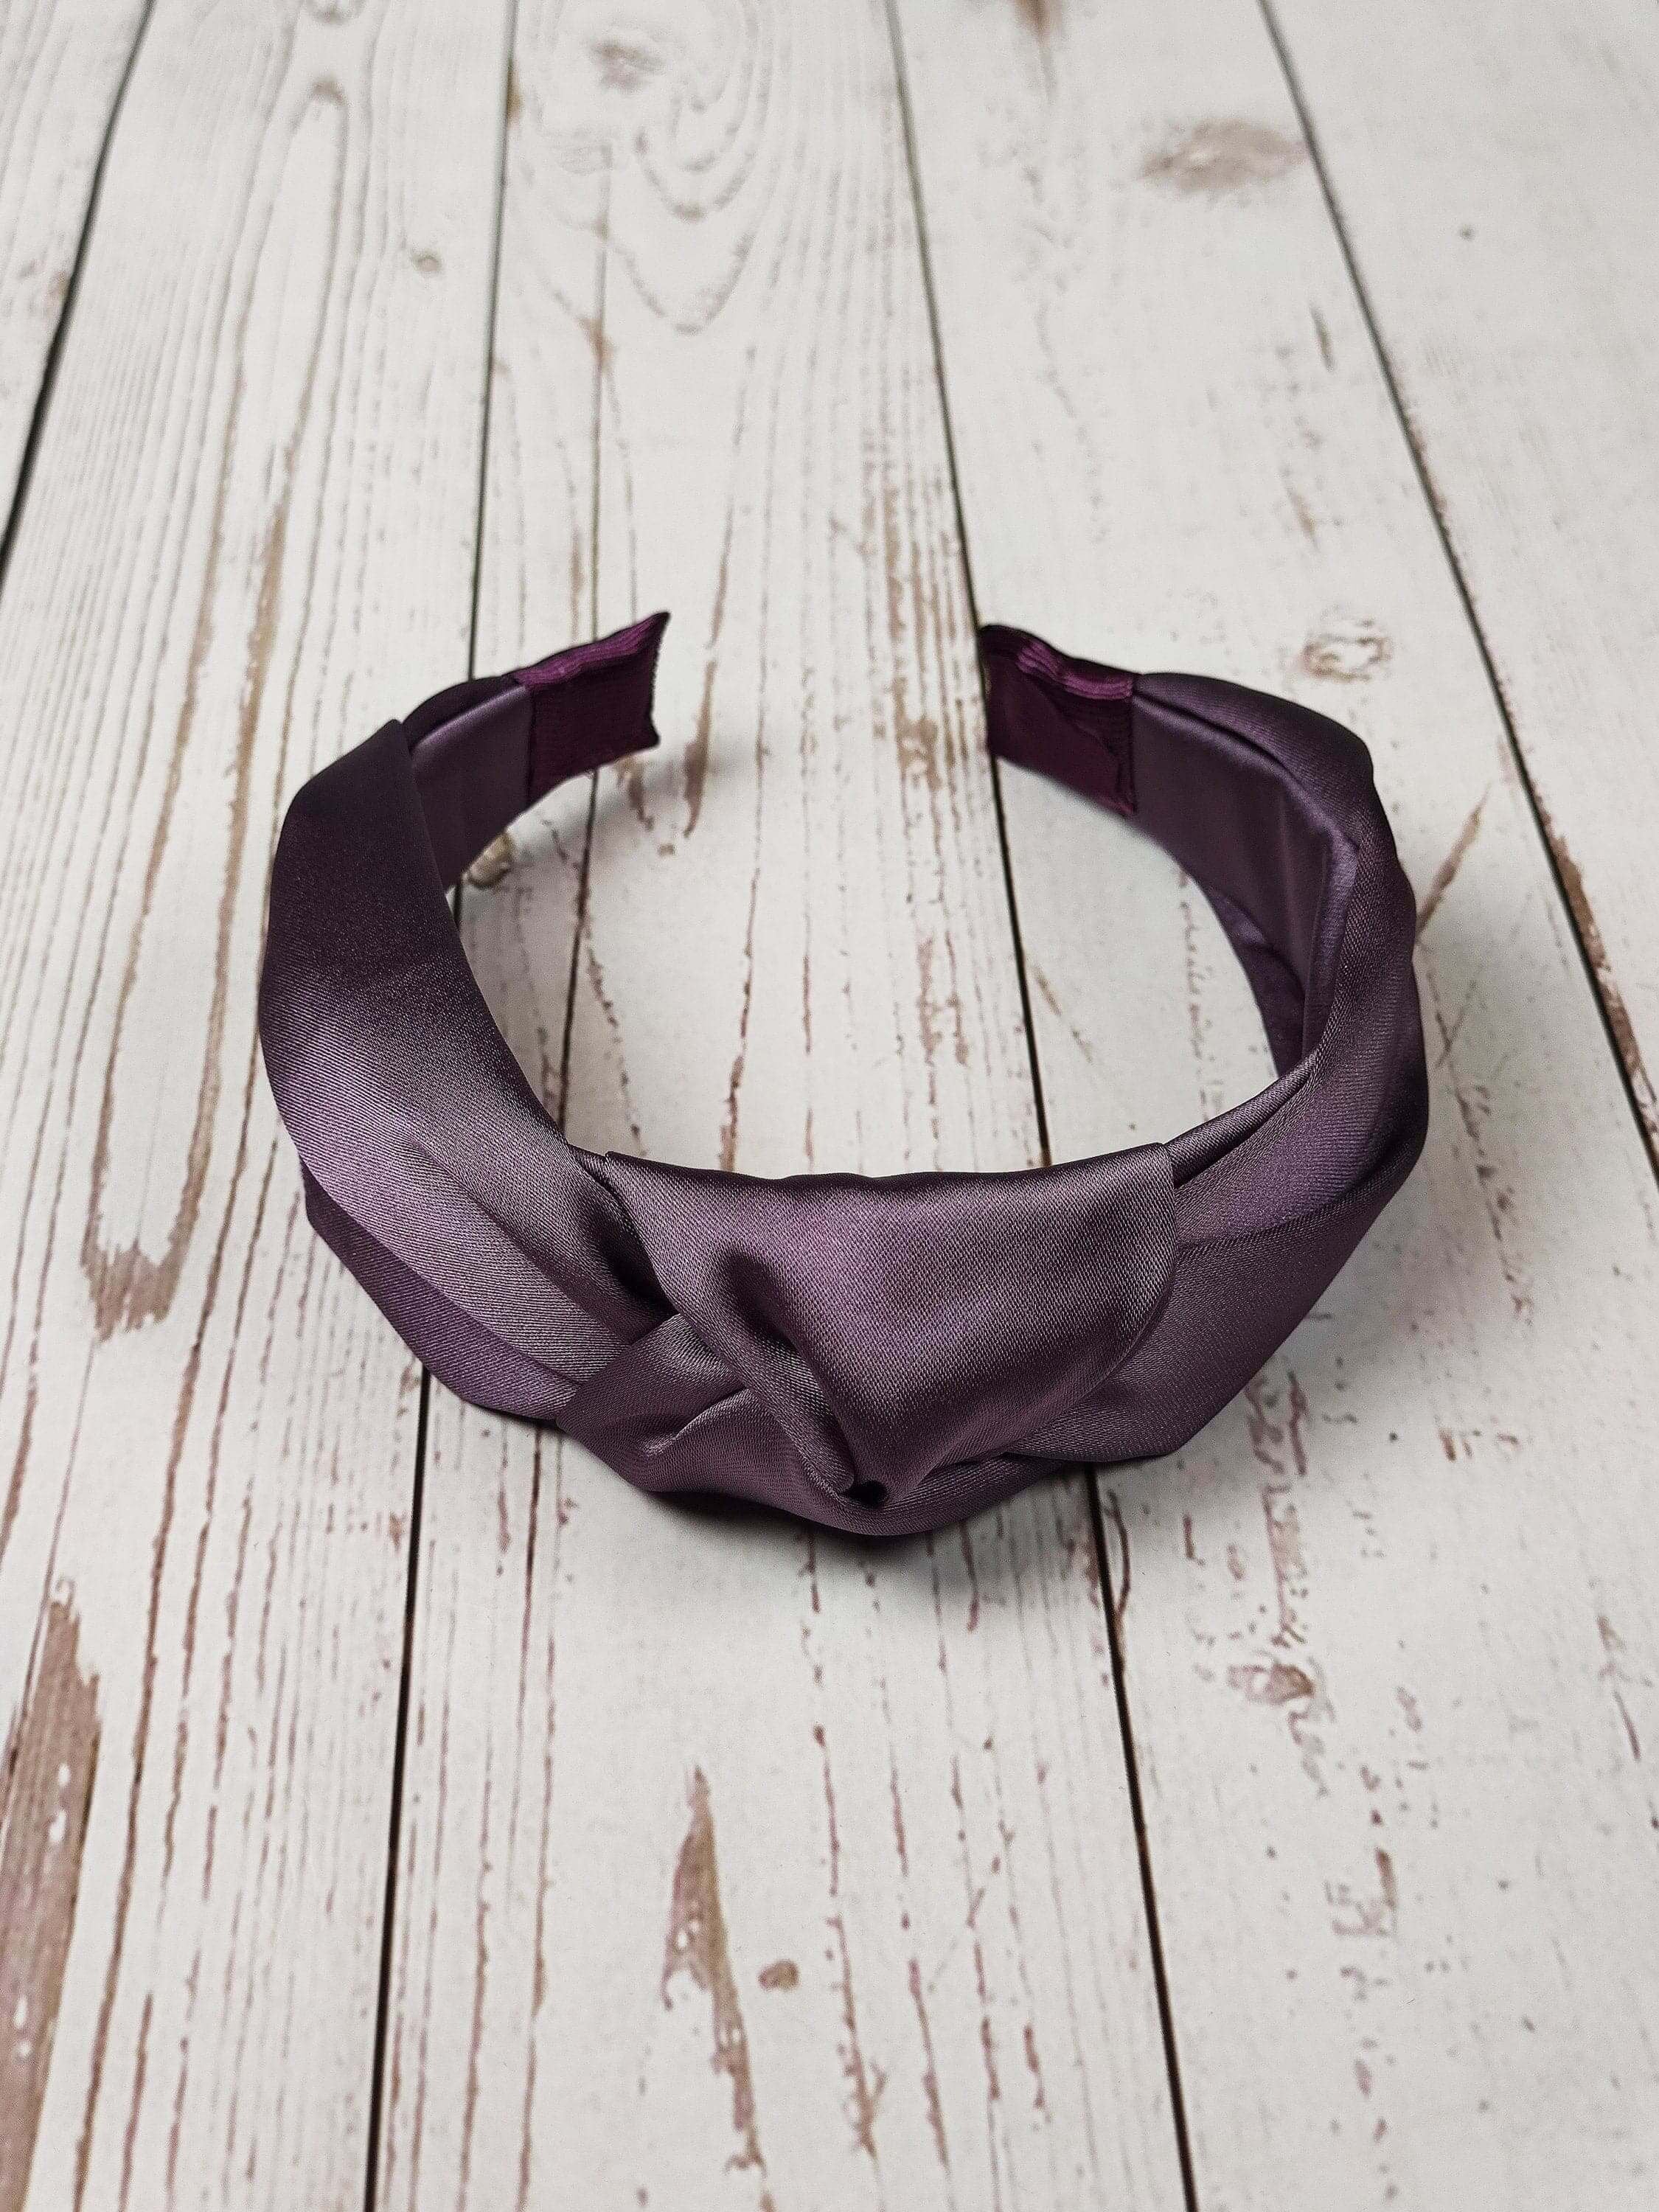 Make a fashion statement with this versatile headband - it can be tied in a variety of ways to suit your every outfit need. From working women to college girls, this versatile headband will look great on everyone!